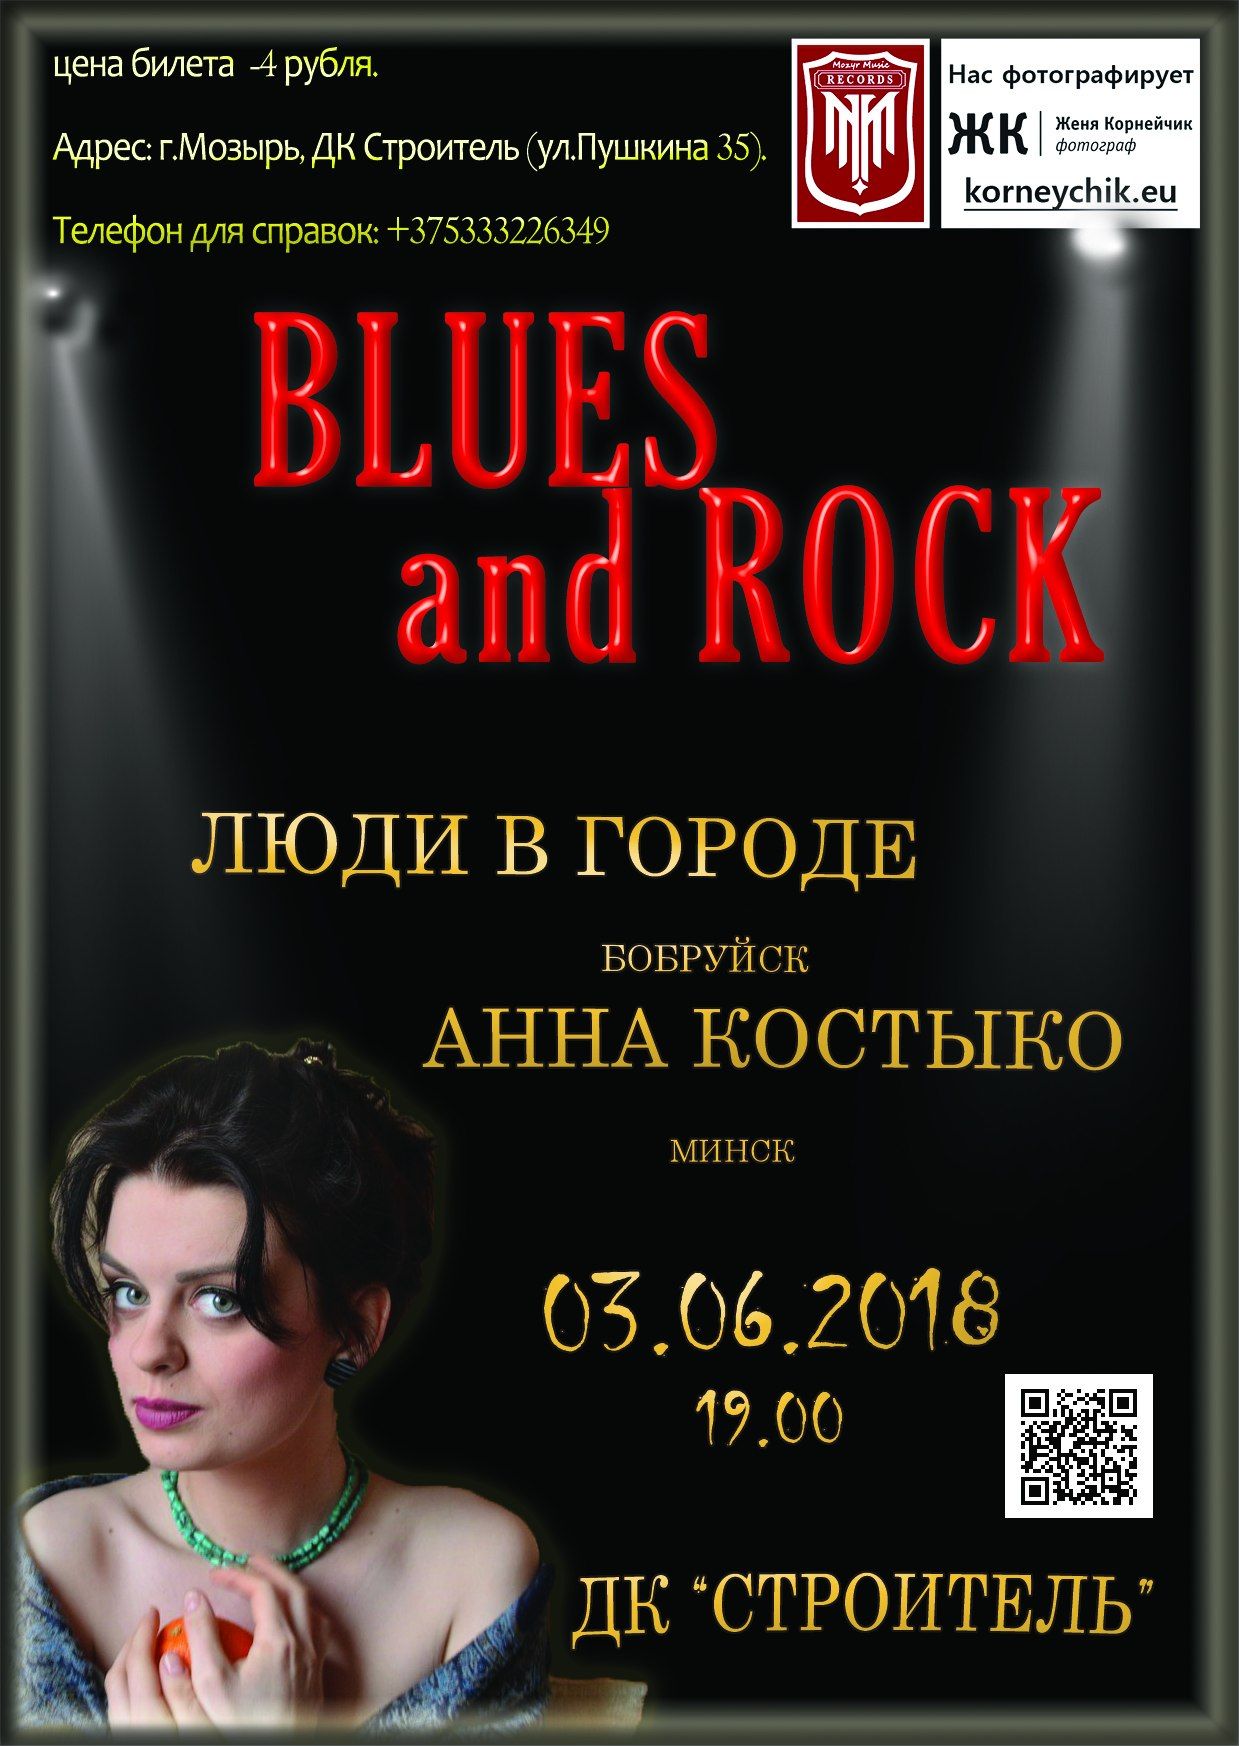 Blues and rock,    